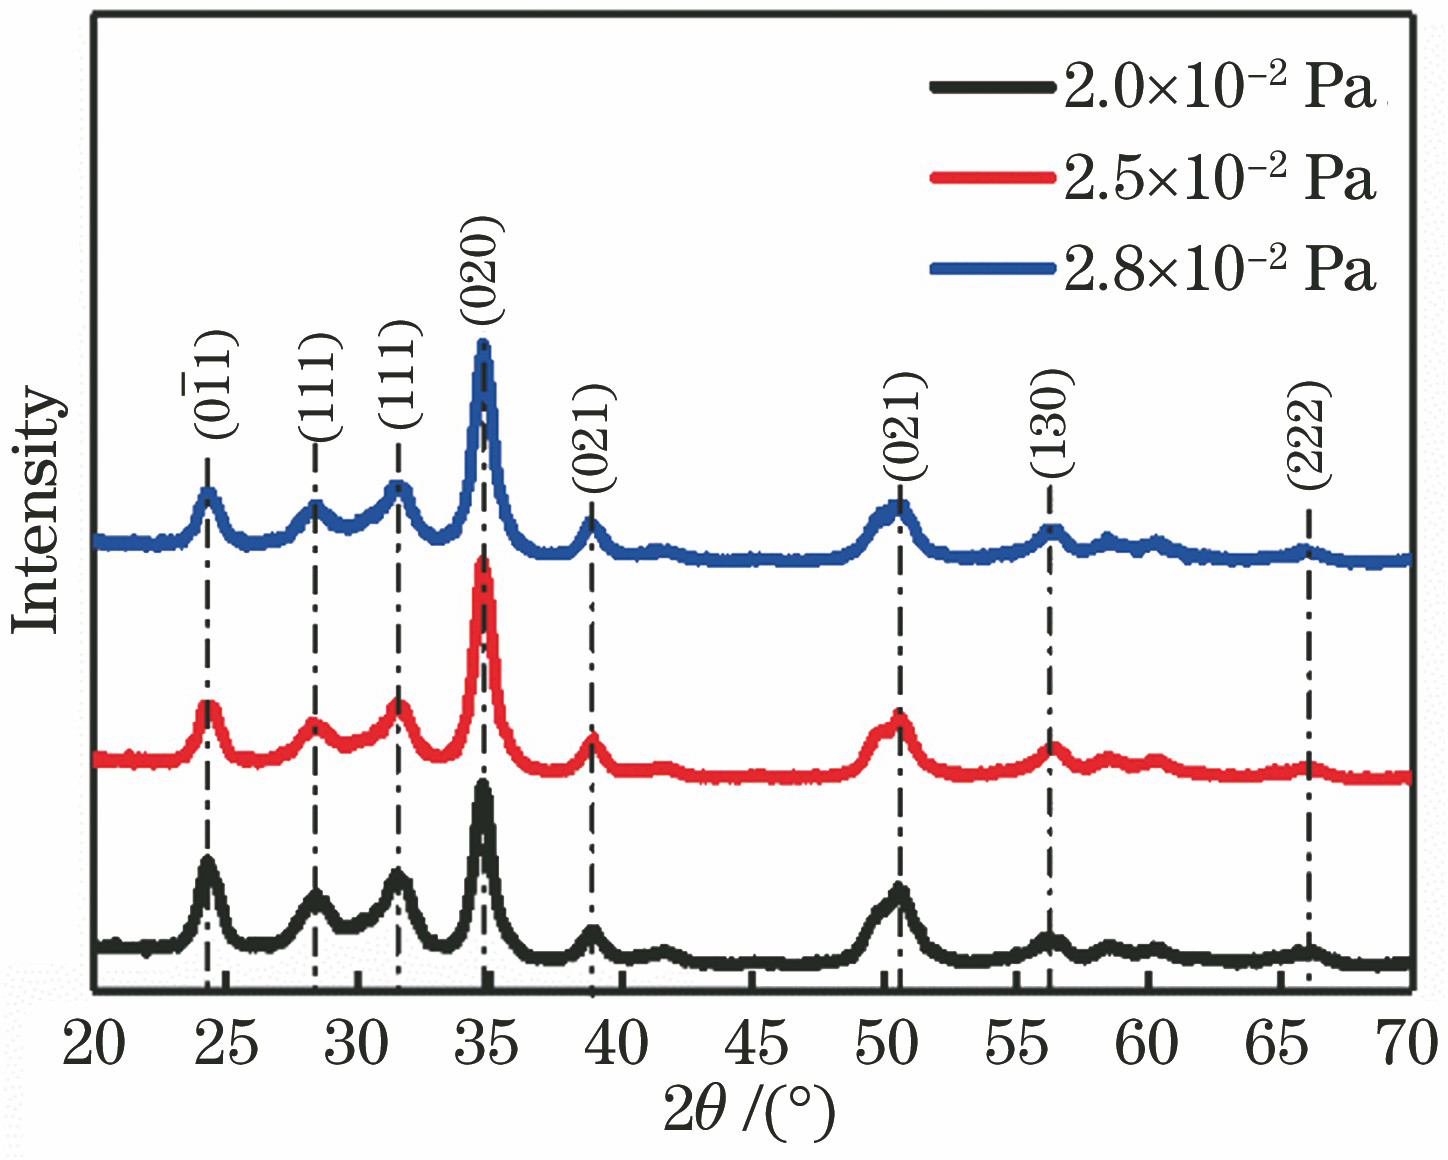 Infrared transmittance spectra of DLC film samples prepared under different conditions